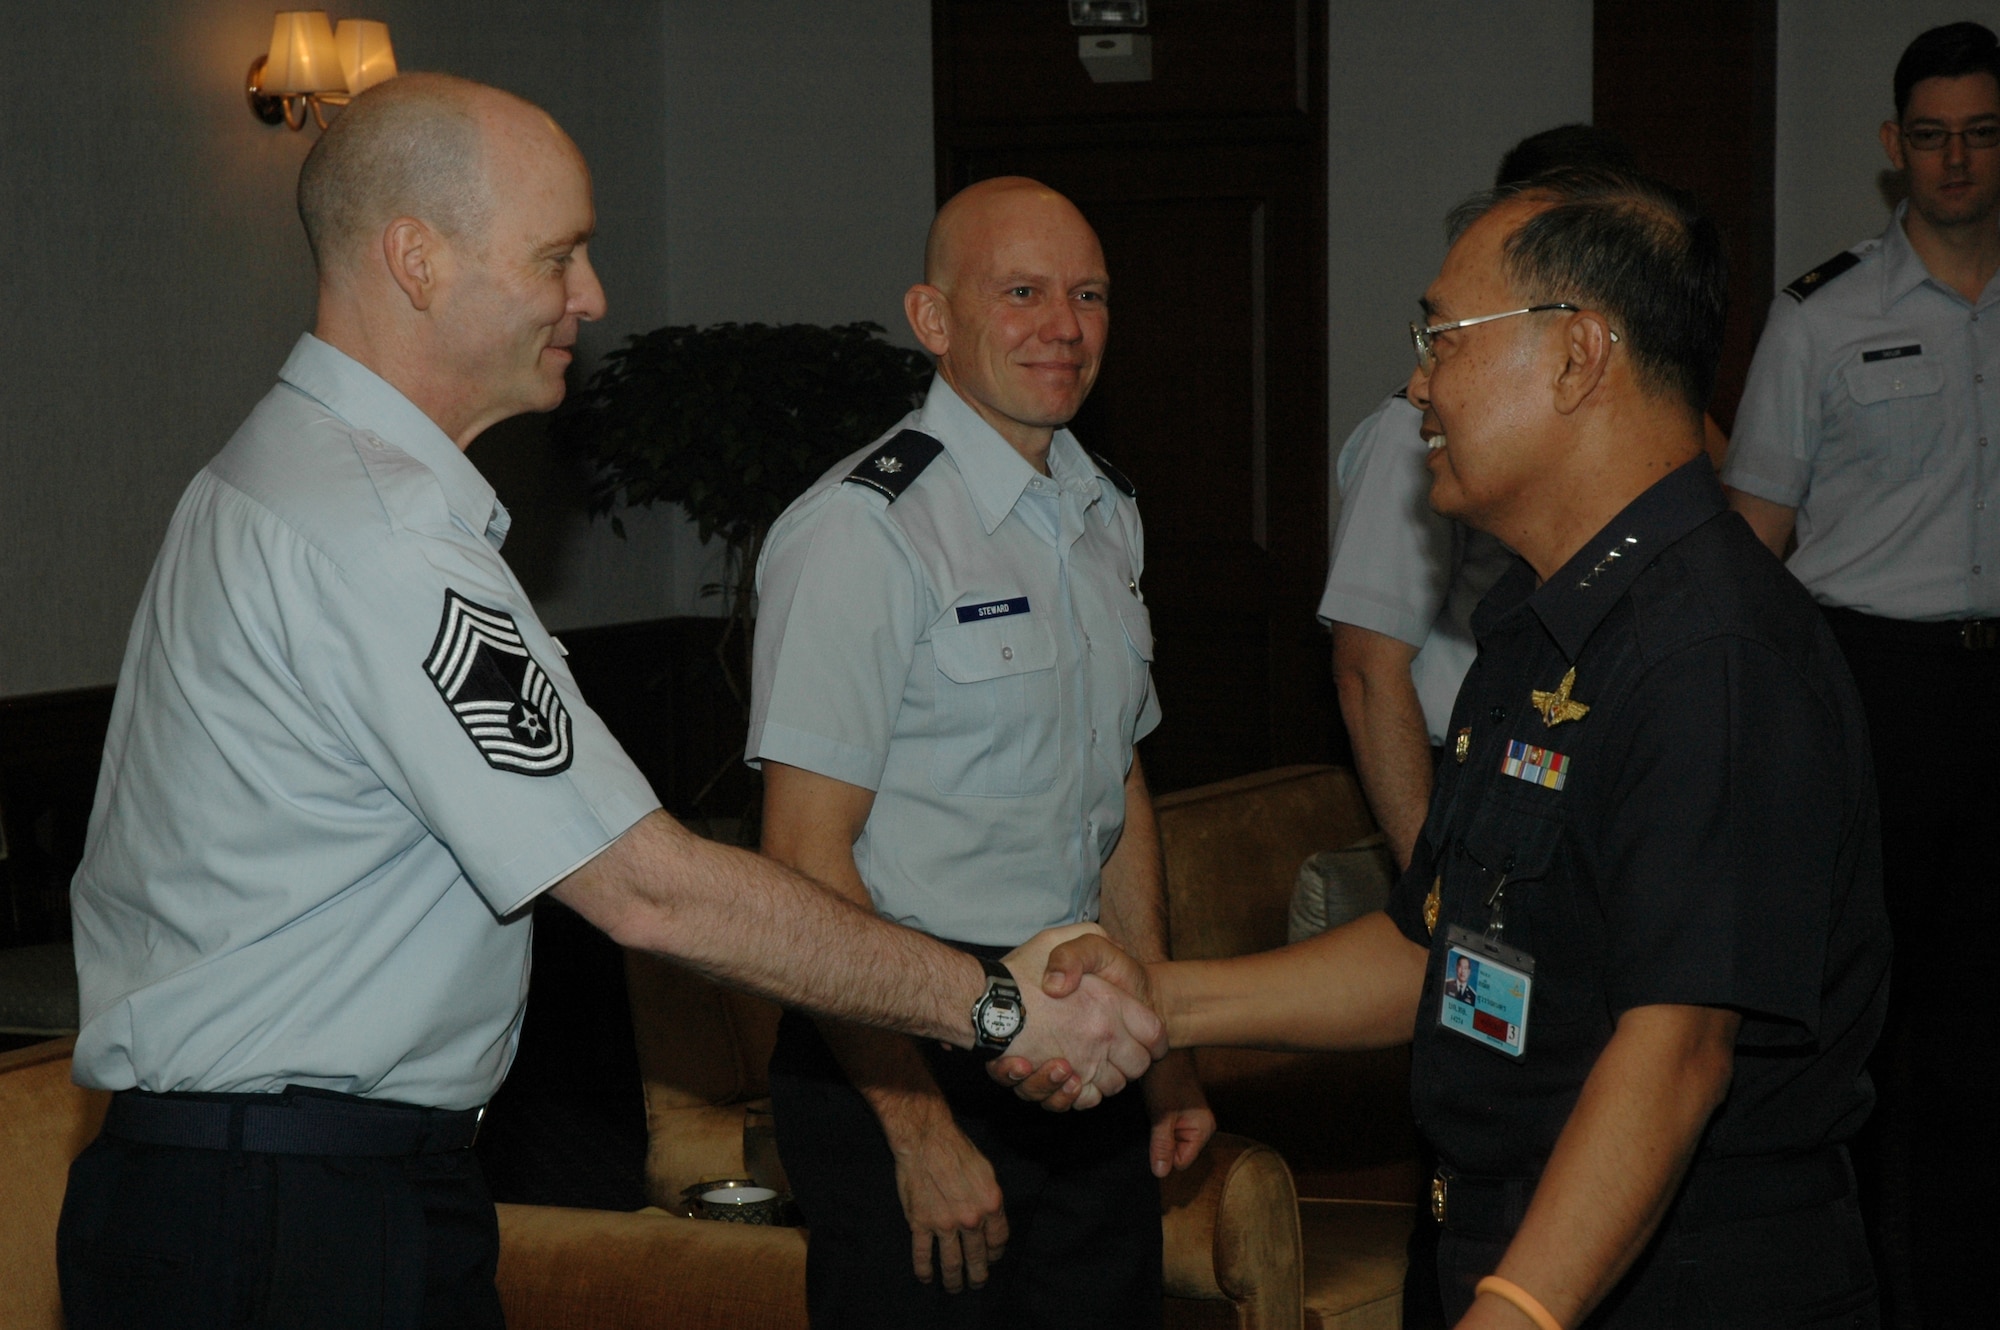 Air Chief Marshal (Gen. equivalent) Kanit Suwannate, assistant commander-in-chief, Royal Thai Air Force welcomes Chief Master Sgt.  James D. Riley, chief loadmaster, and Lt. Col. James M. Steward, chief of flying safety, with the Air Force Reserve’s 302nd Airlift Wing in Don Muang Royal Thai Air Force Base.  Seven members of the Air Force Reserve’s 302 AW, based at Peterson AFB, Colo. traveled to Don Muang Royal Thai Air Force Base, Thailand to provide expert training to RTAF members on safe and effective MAFFS operations.  This event marks the first time the Air Force Reserve has sent delegates to train a foreign Air Force on use of the MAFFS equipment.  (U.S. Air Force photo/Capt. Jody L. Ritchie)